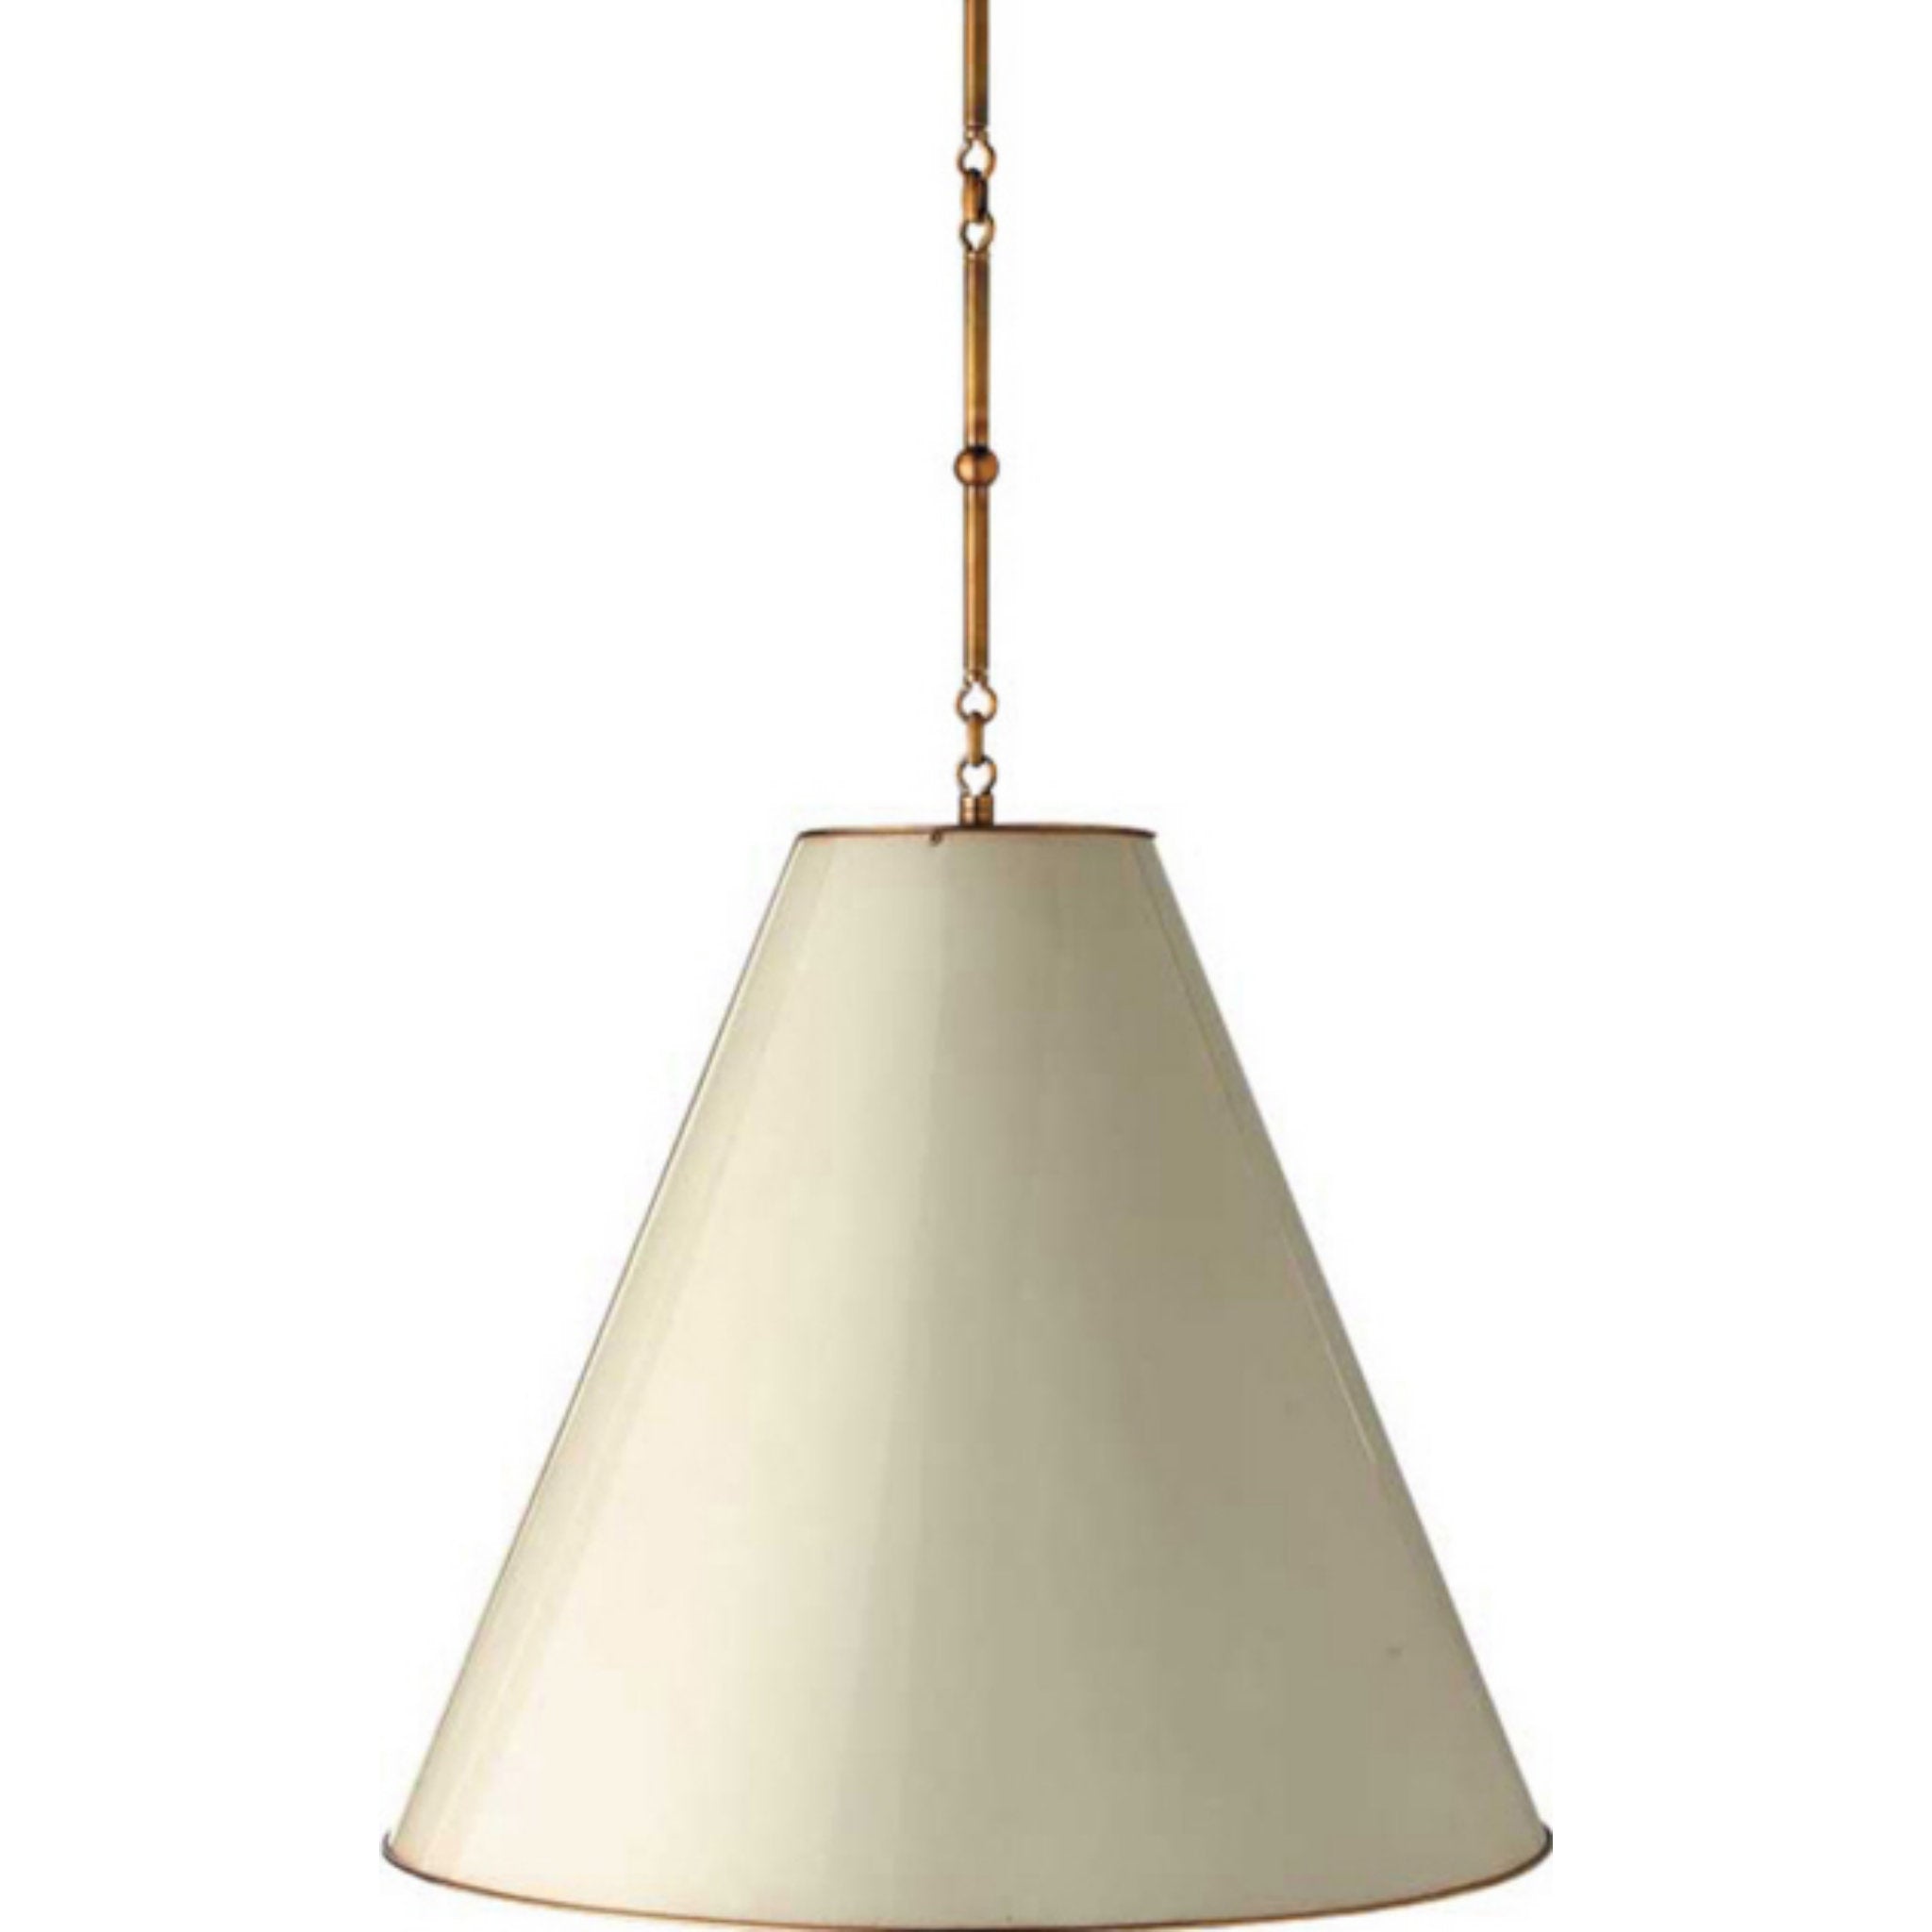 Thomas O'Brien Goodman Large Hanging Lamp in Hand-Rubbed Antique Brass